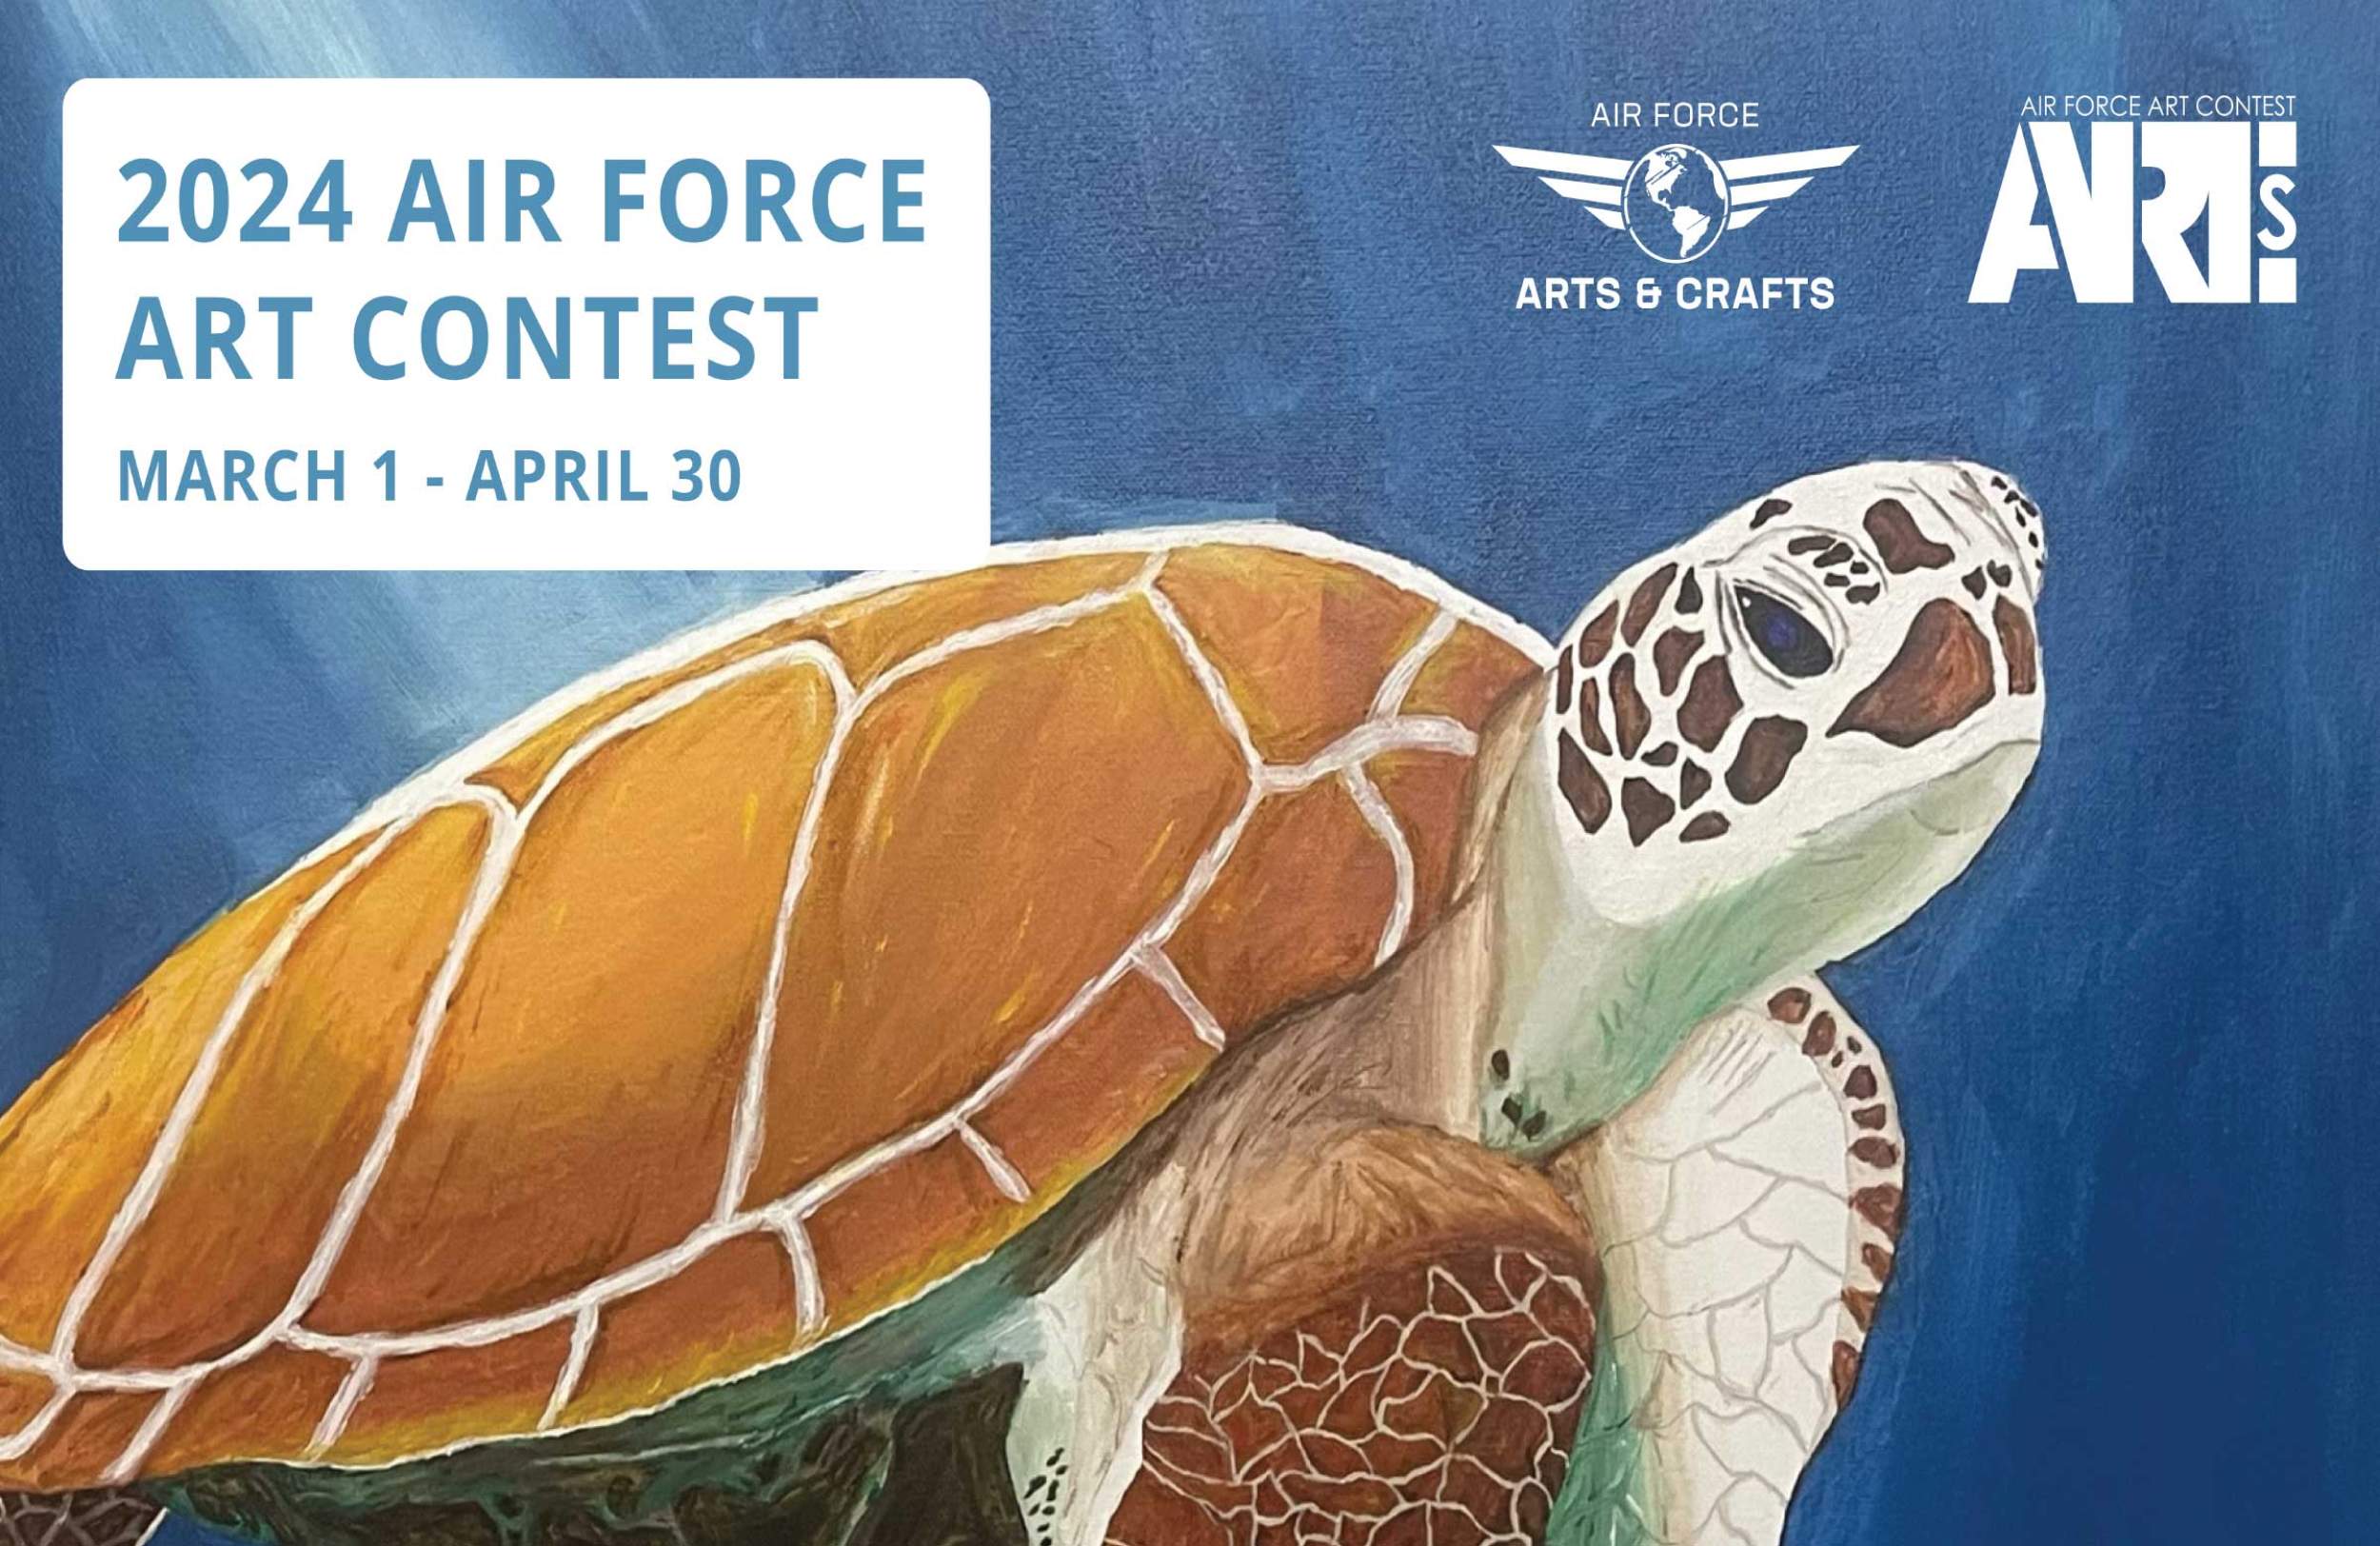 2024 AIR FORCE ART CONTEST